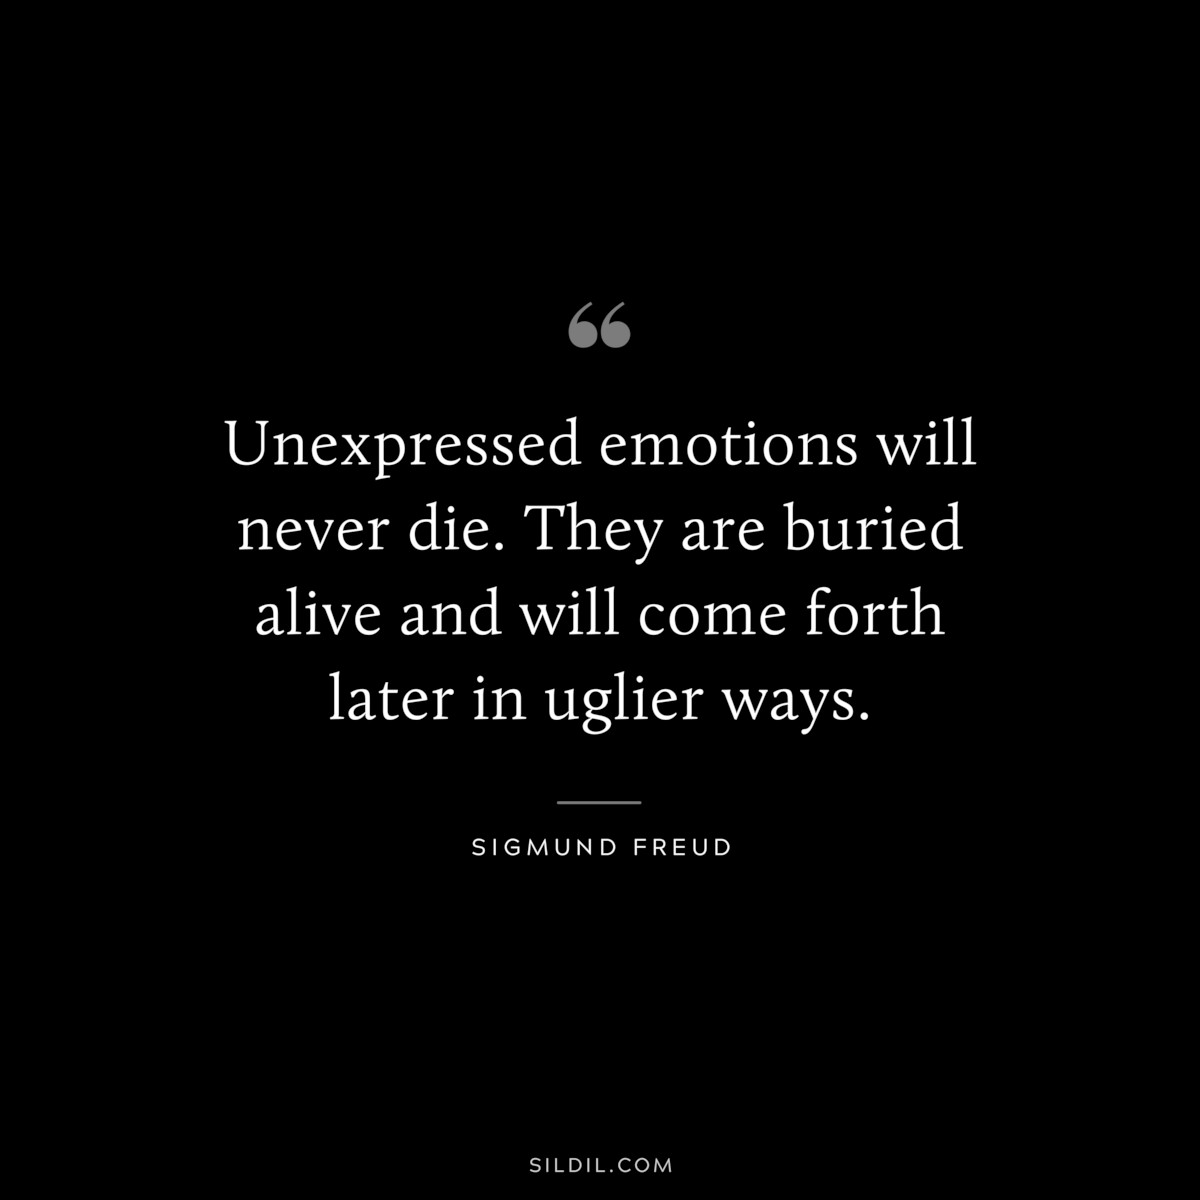 Unexpressed emotions will never die. They are buried alive and will come forth later in uglier ways. ― Sigmund Frued